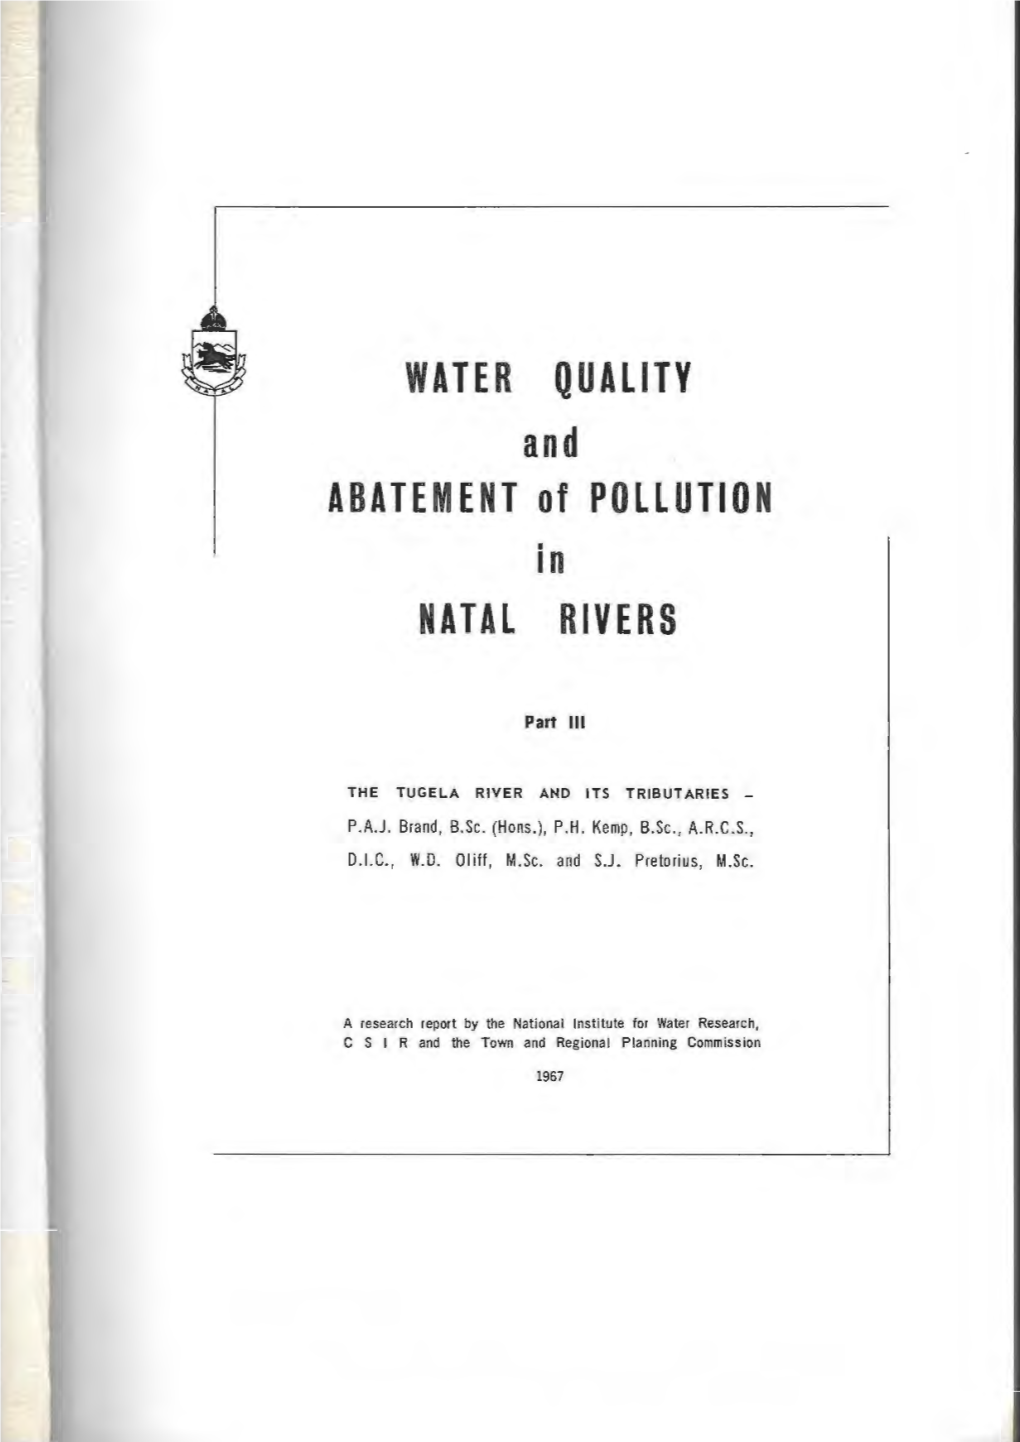 WATER QUALITY and ABATEMENT of POLLUTION NATAL RIVERS